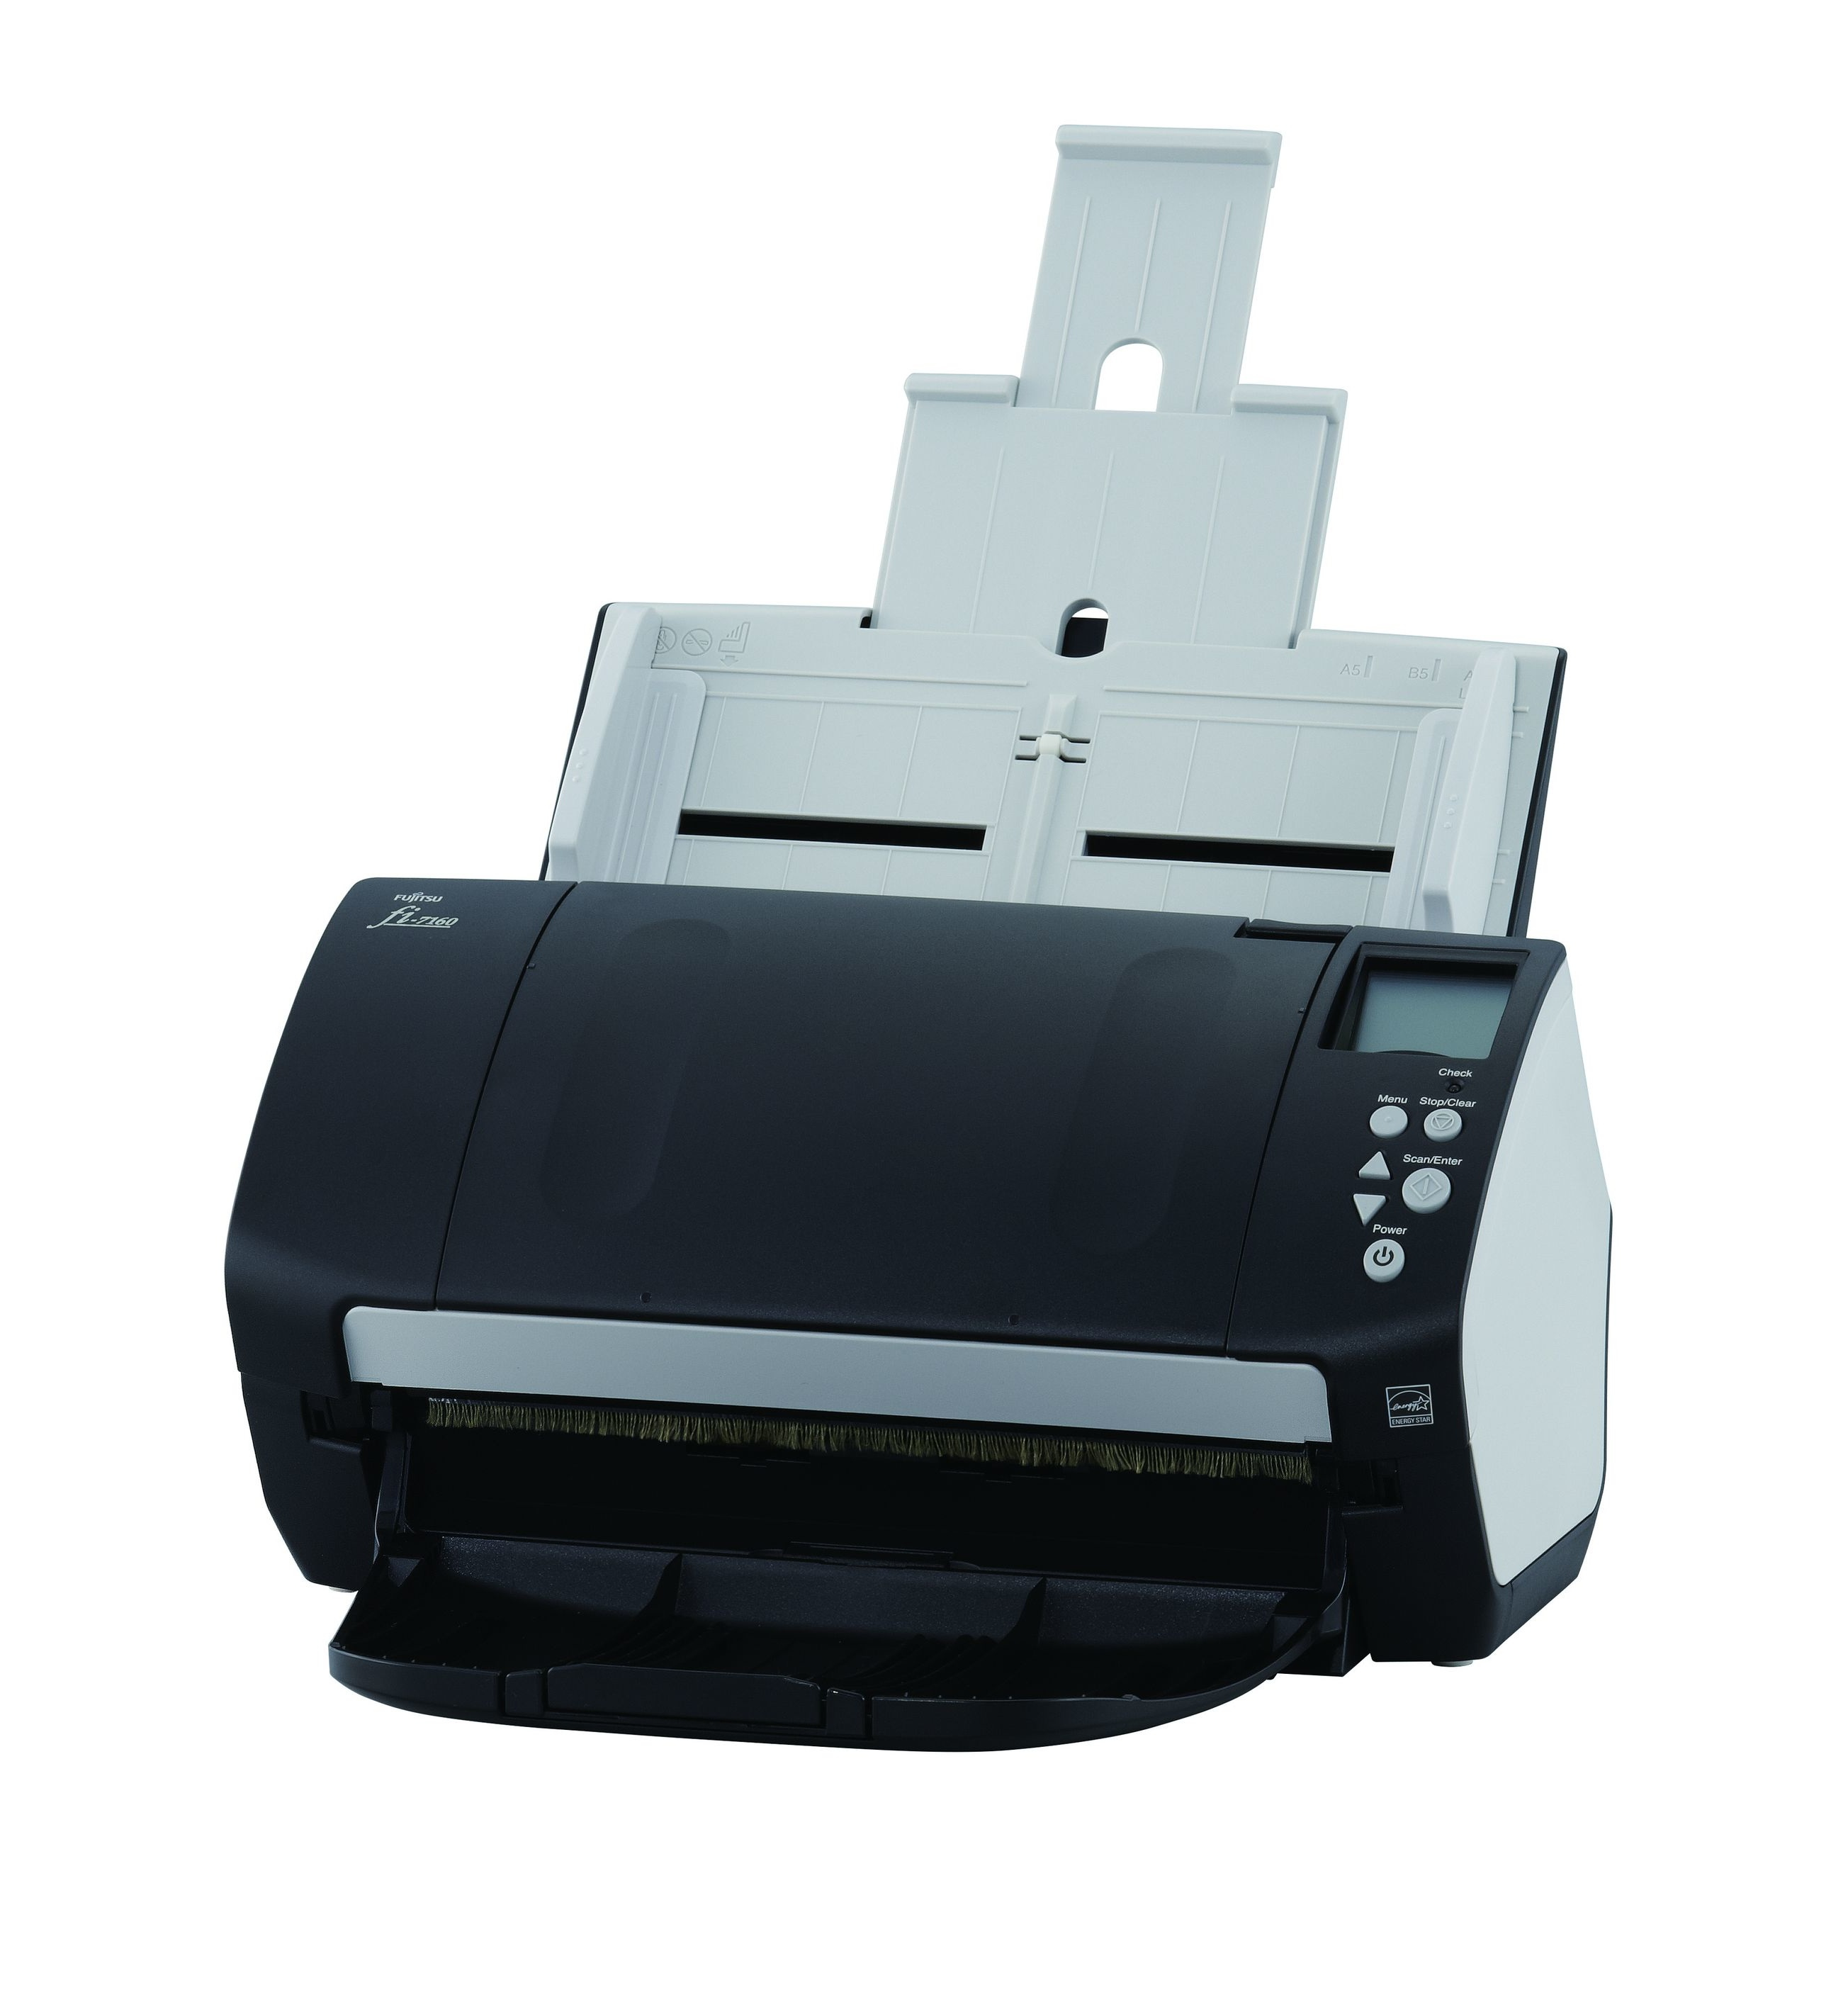 Fujitsu fi-7180 - Document scanner - Dual CCD - Duplex - 8.5 in x 14 in - 600 dpi x 600 dpi - up to 80 ppm (mono) / up to 80 ppm (color) - ADF (80 sheets) - up to 6000 scans per day - USB 3.0 - refurbished